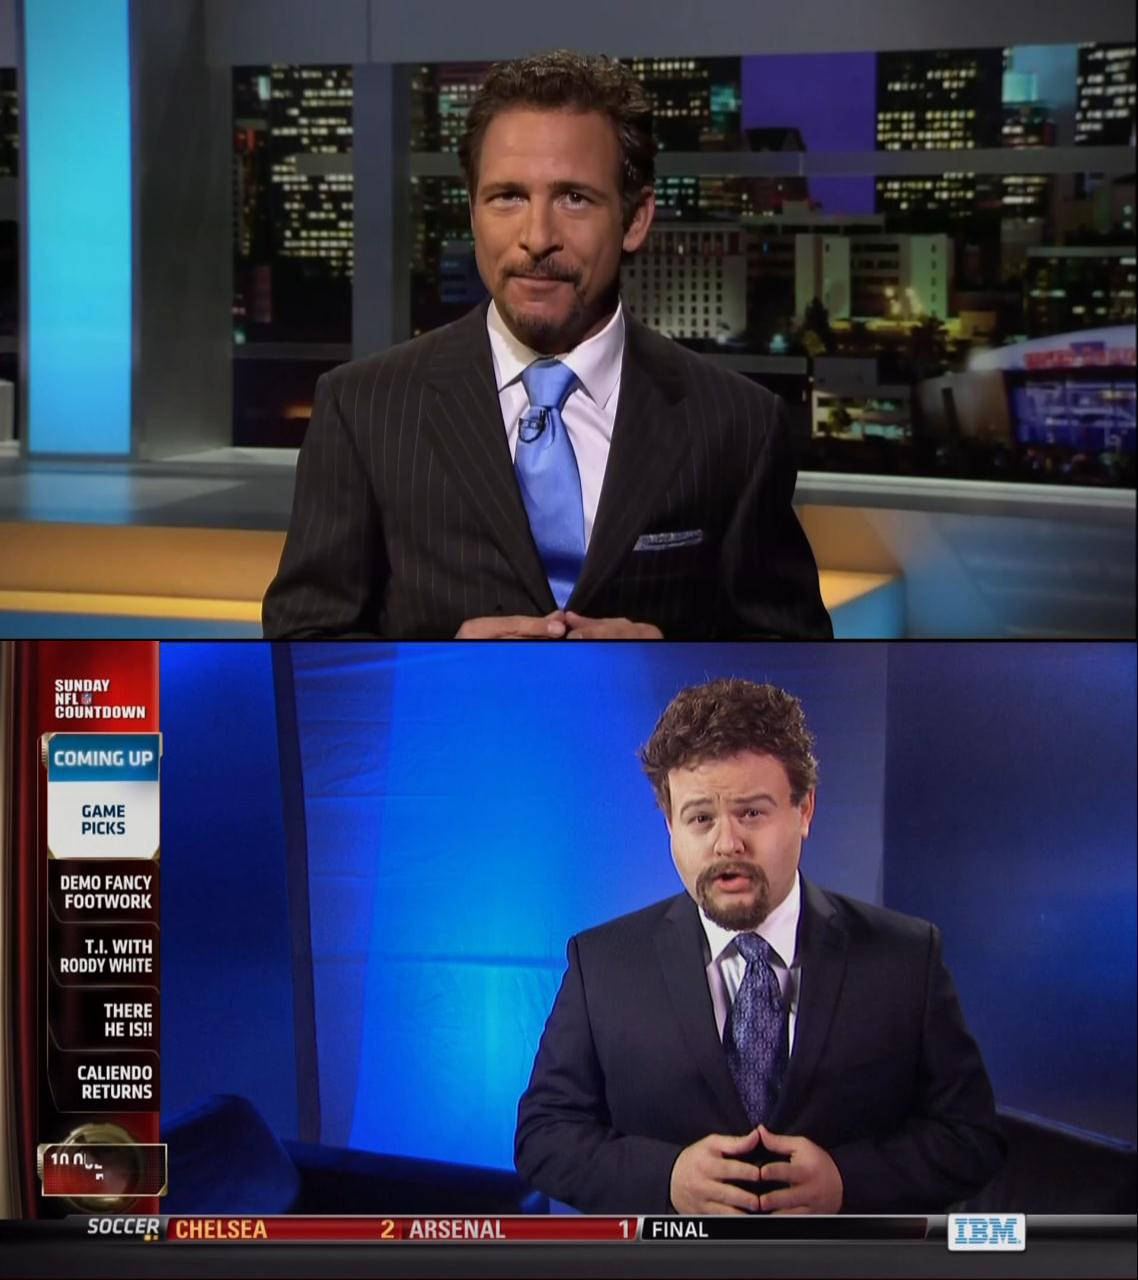 Here's Jim Rome on the CBS pre-game show and 'Jim Rome' on the ESPN  pre-game show